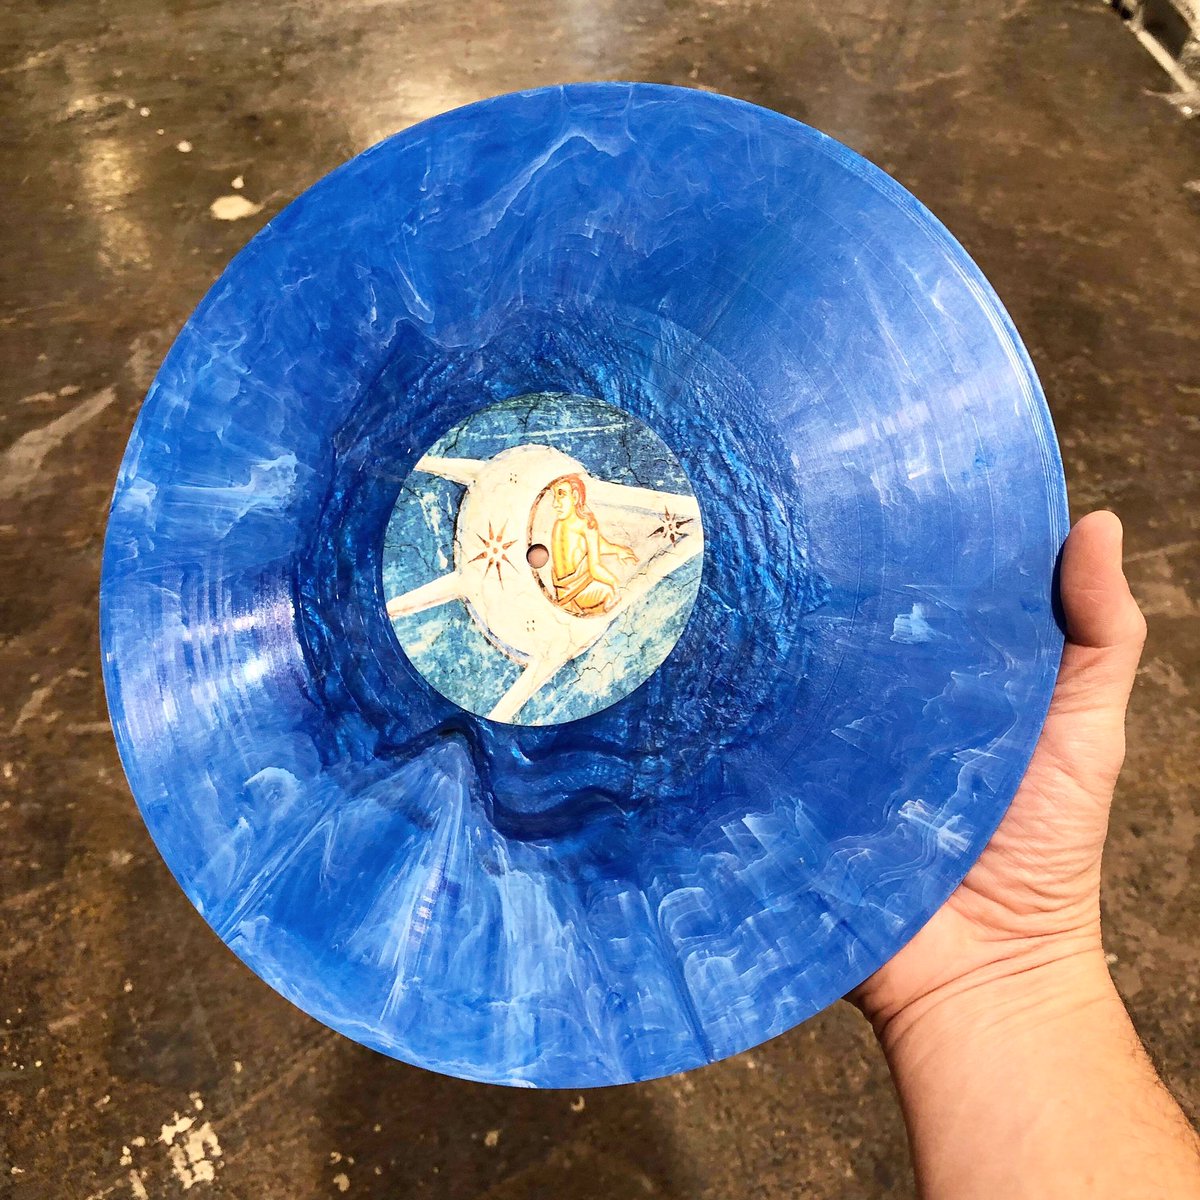 Custom mixed metallic electric blue with molten silver for @dipteridrecords upcoming Murder in the Red Barn LP!!

#pressedwithLOVEINchicago #pressedinUSA #madeinUSA #presslocal 
#colorvinyl #colorvinylrecords #diyvinyl #diyvinylpressing #chicagovinyl #chicagopressingplant